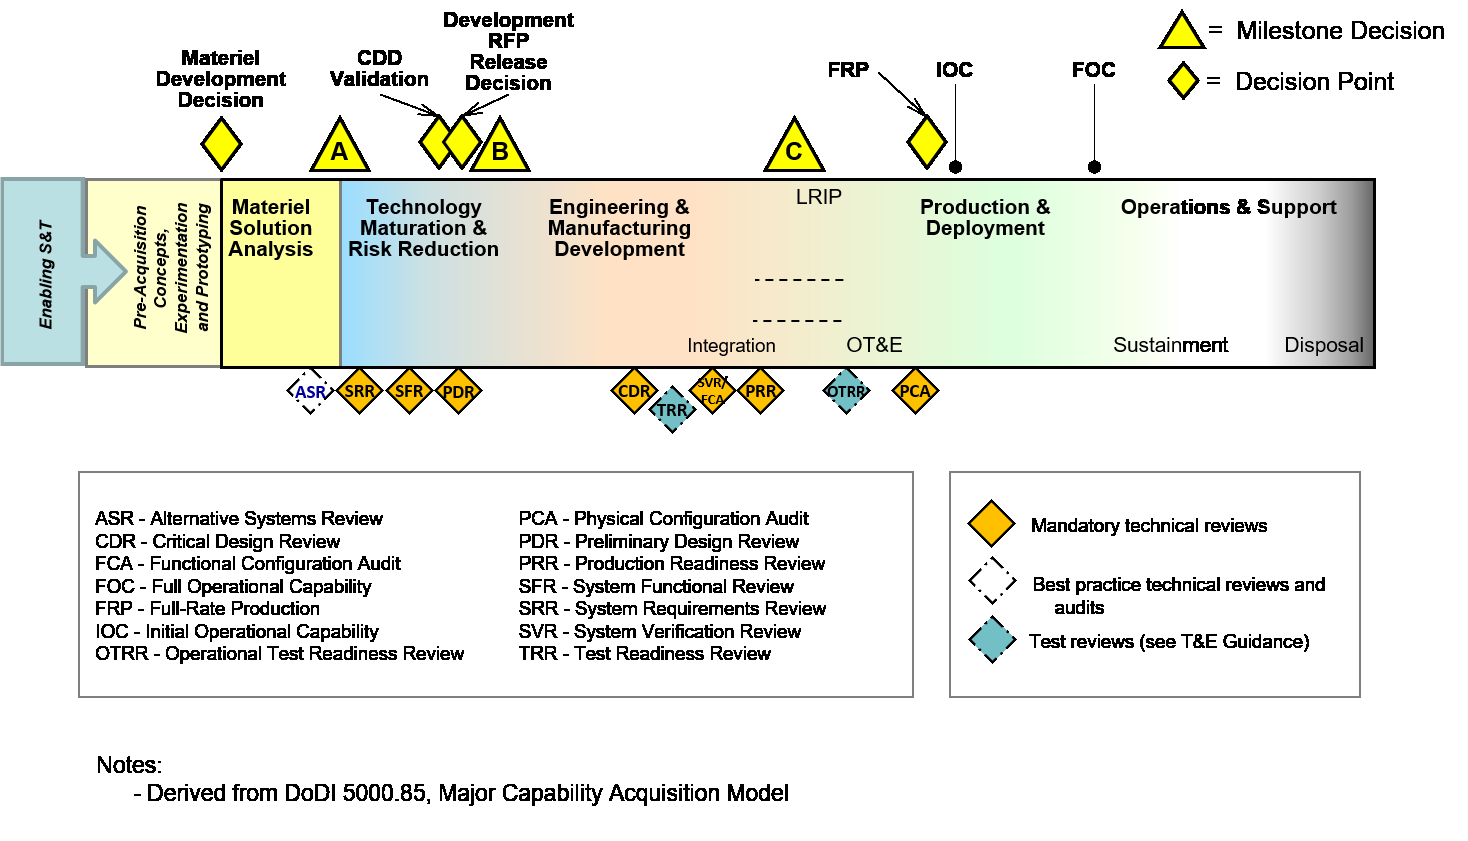 Image of the Technical Reviews and Audits for the Major Capability Acquisition Life Cycle